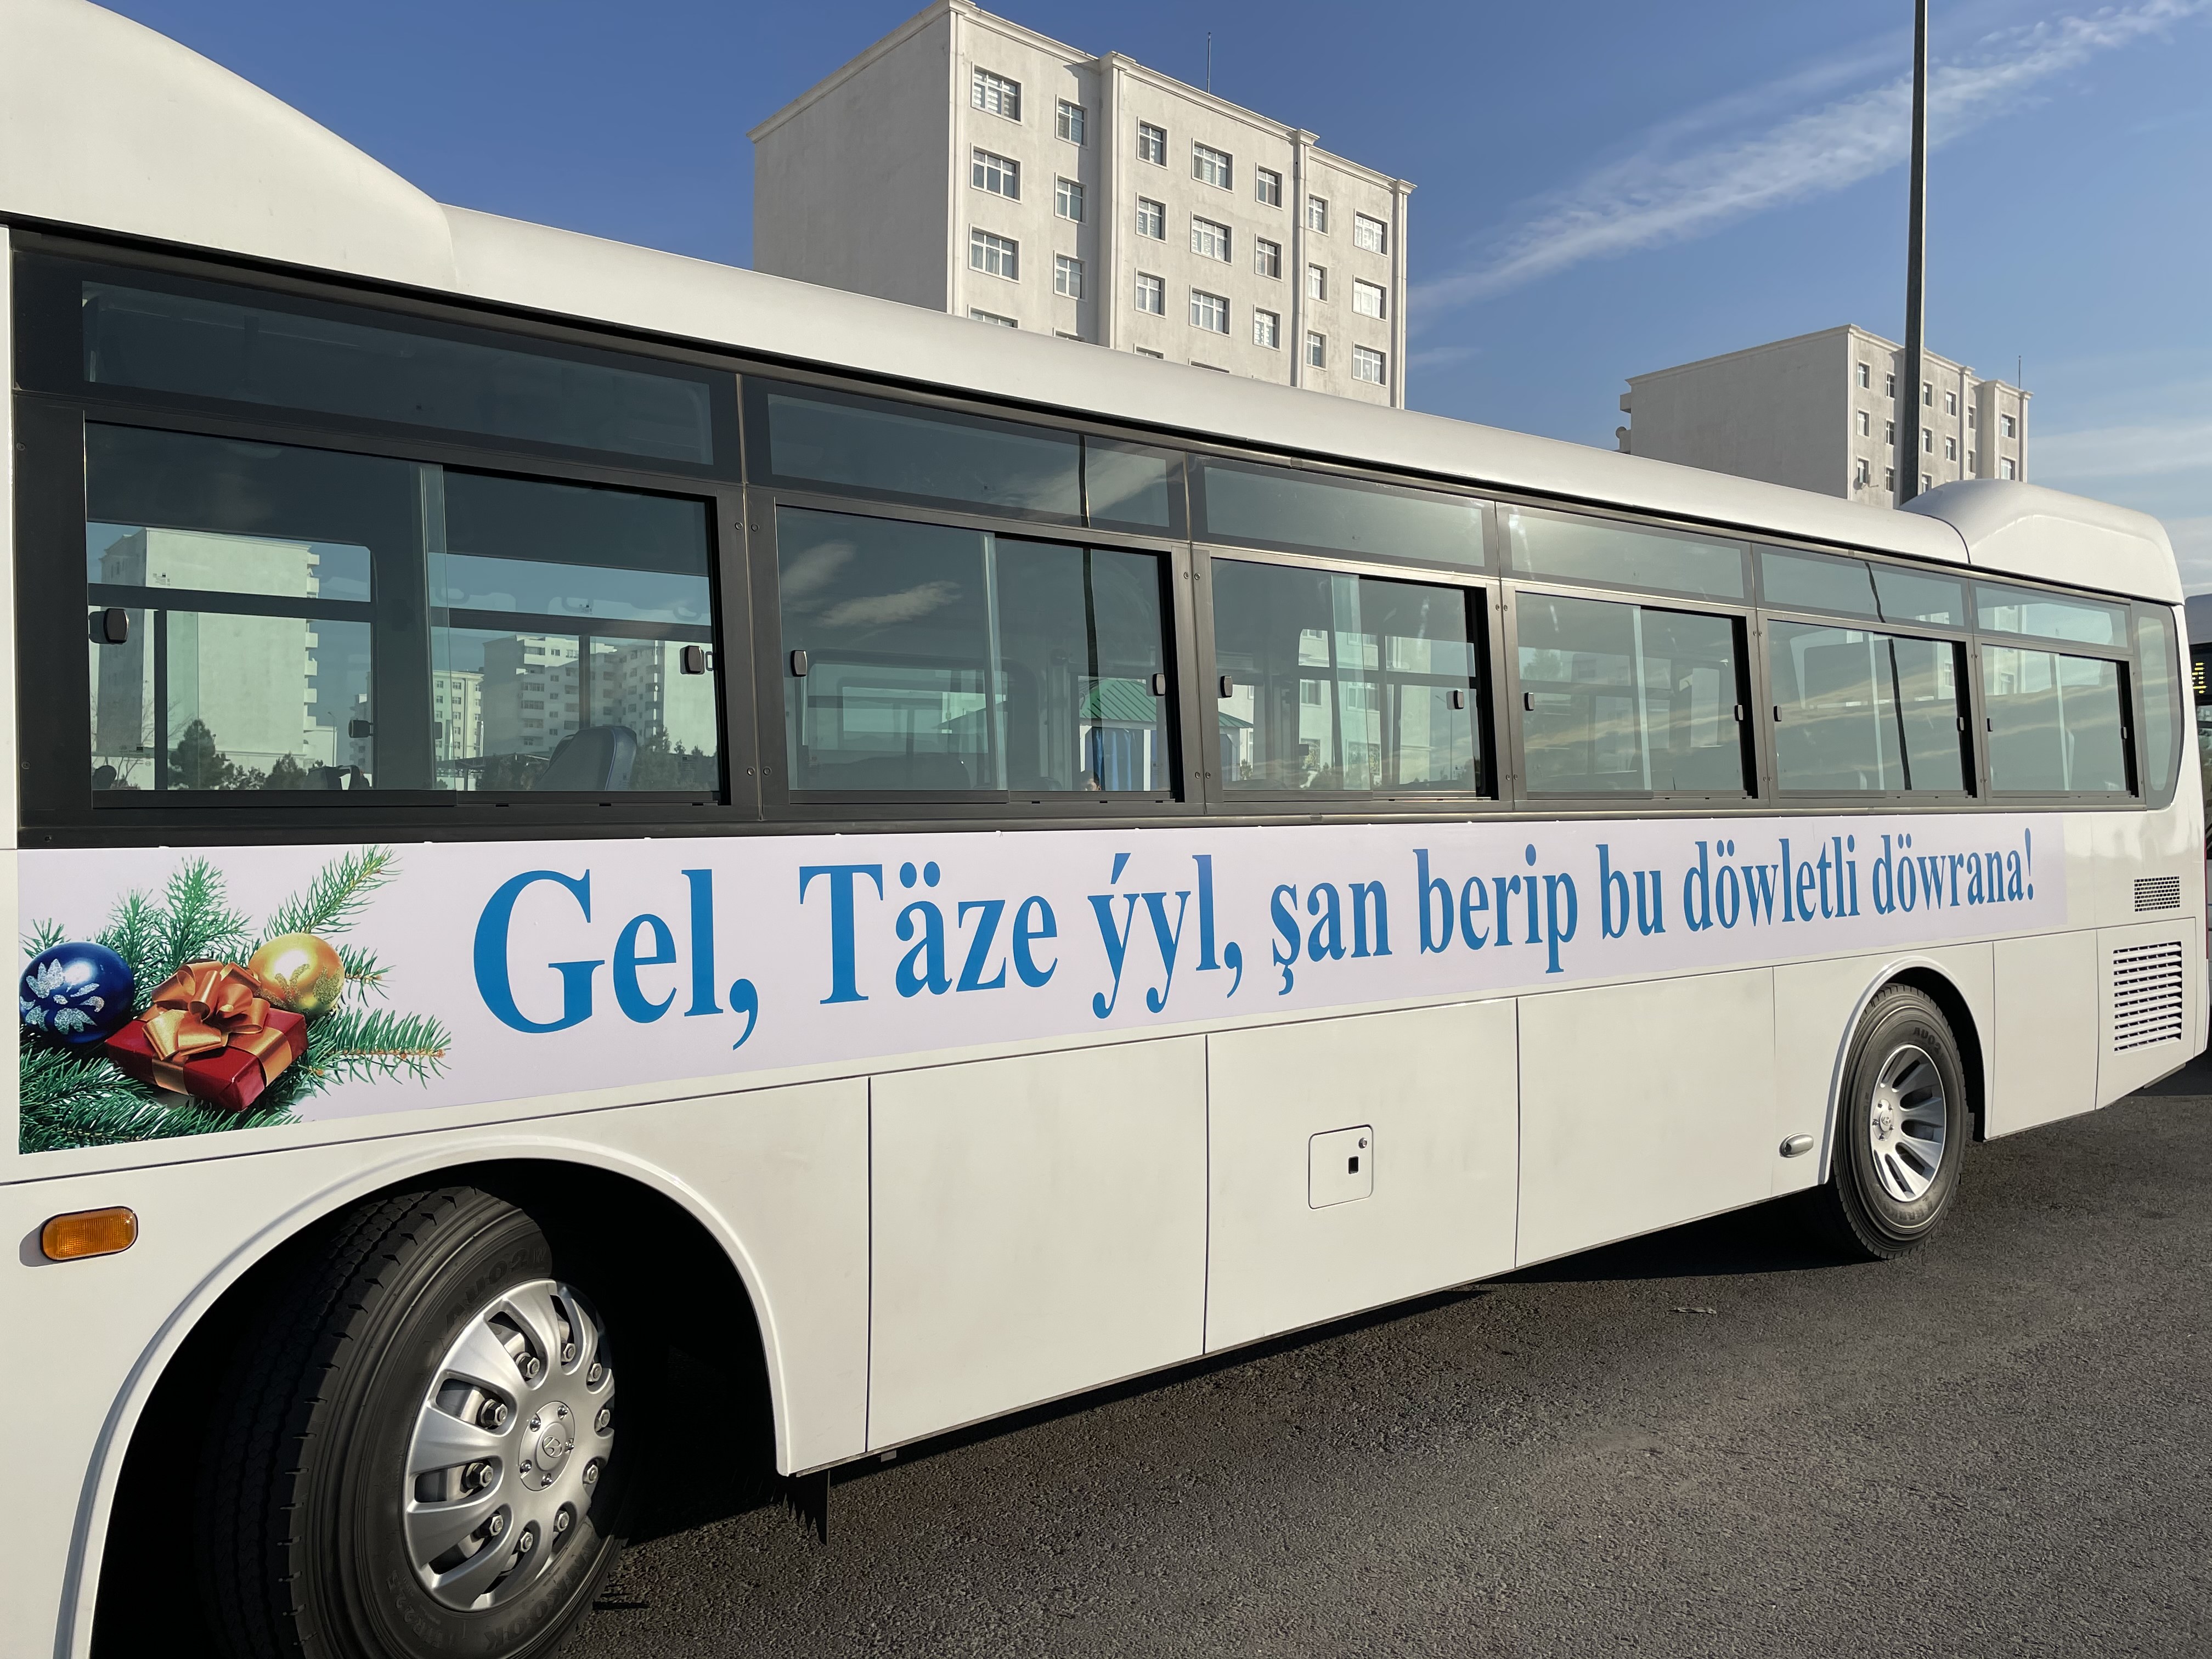 Public transport was decorated in the capital for the holiday